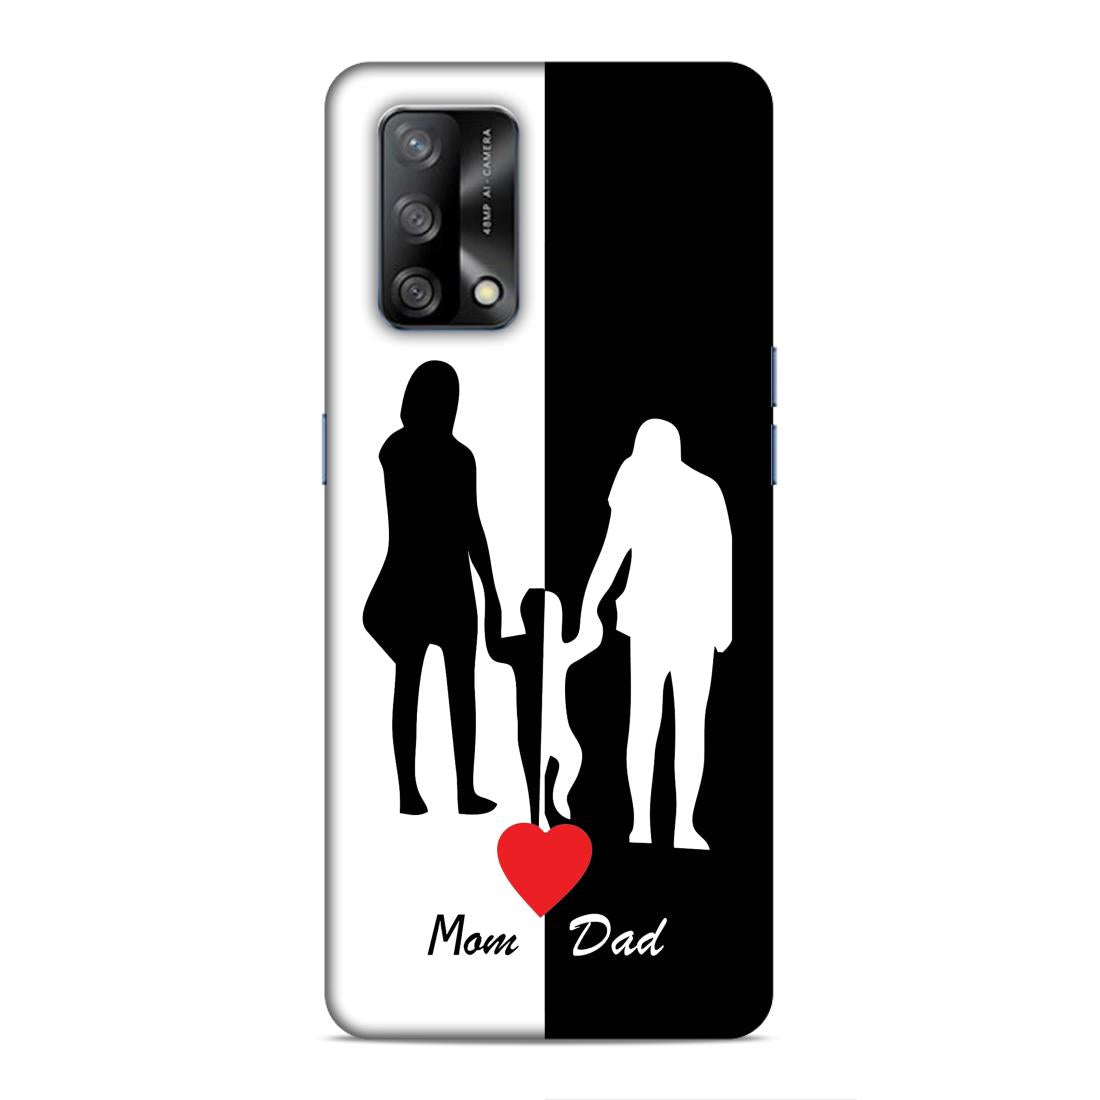 Mom Dad Hard Back Case For Oppo F19 / F19s